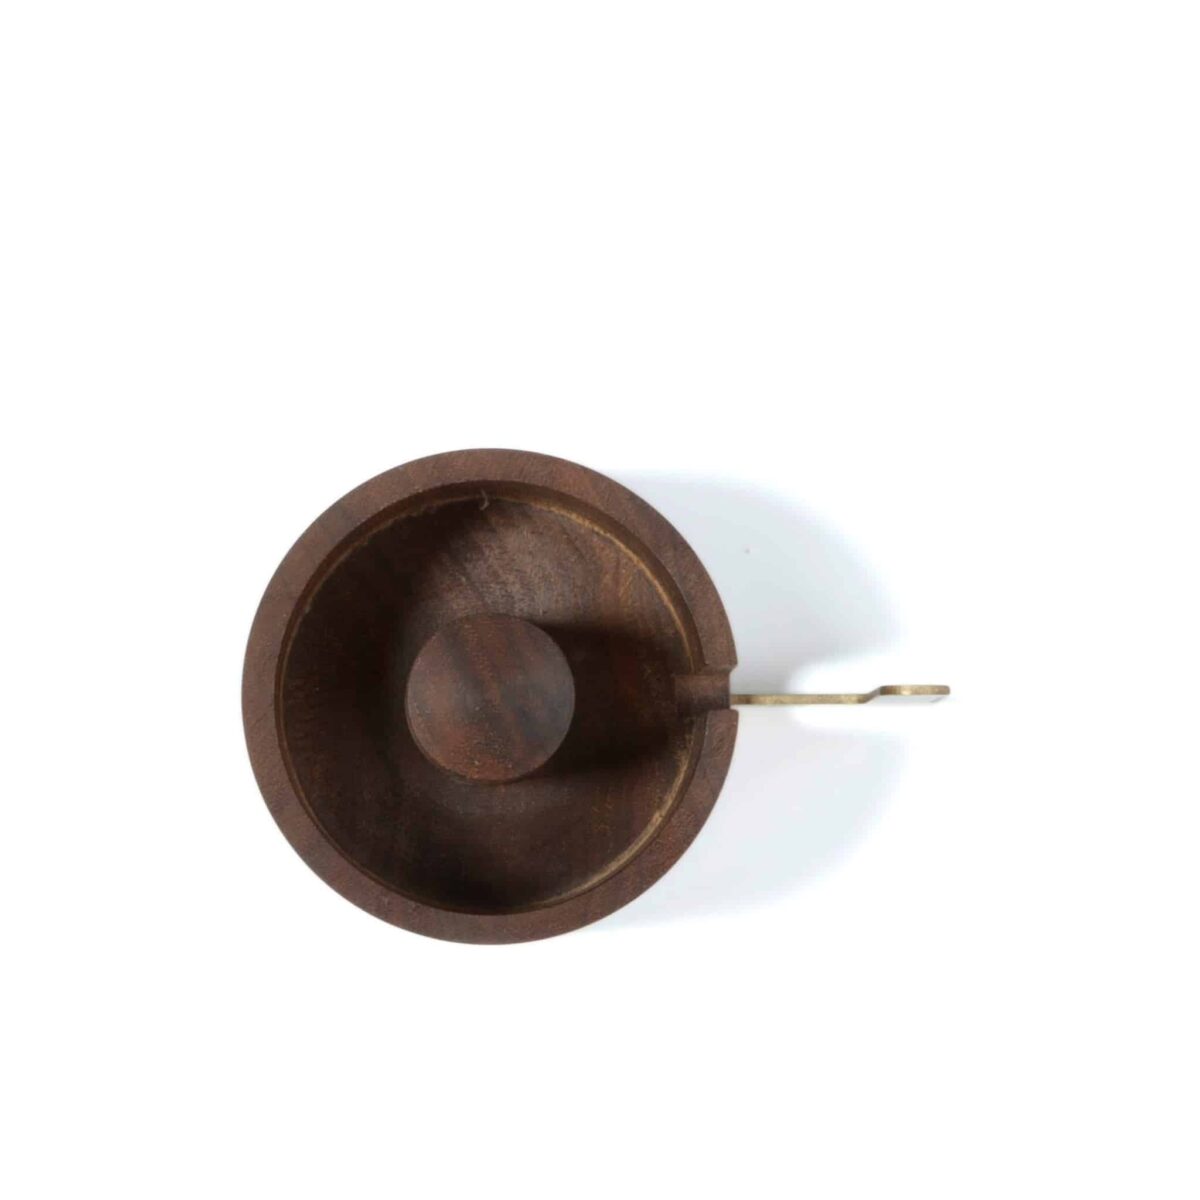 Another-country-desktop-one-tape-dispenser-walnut-002